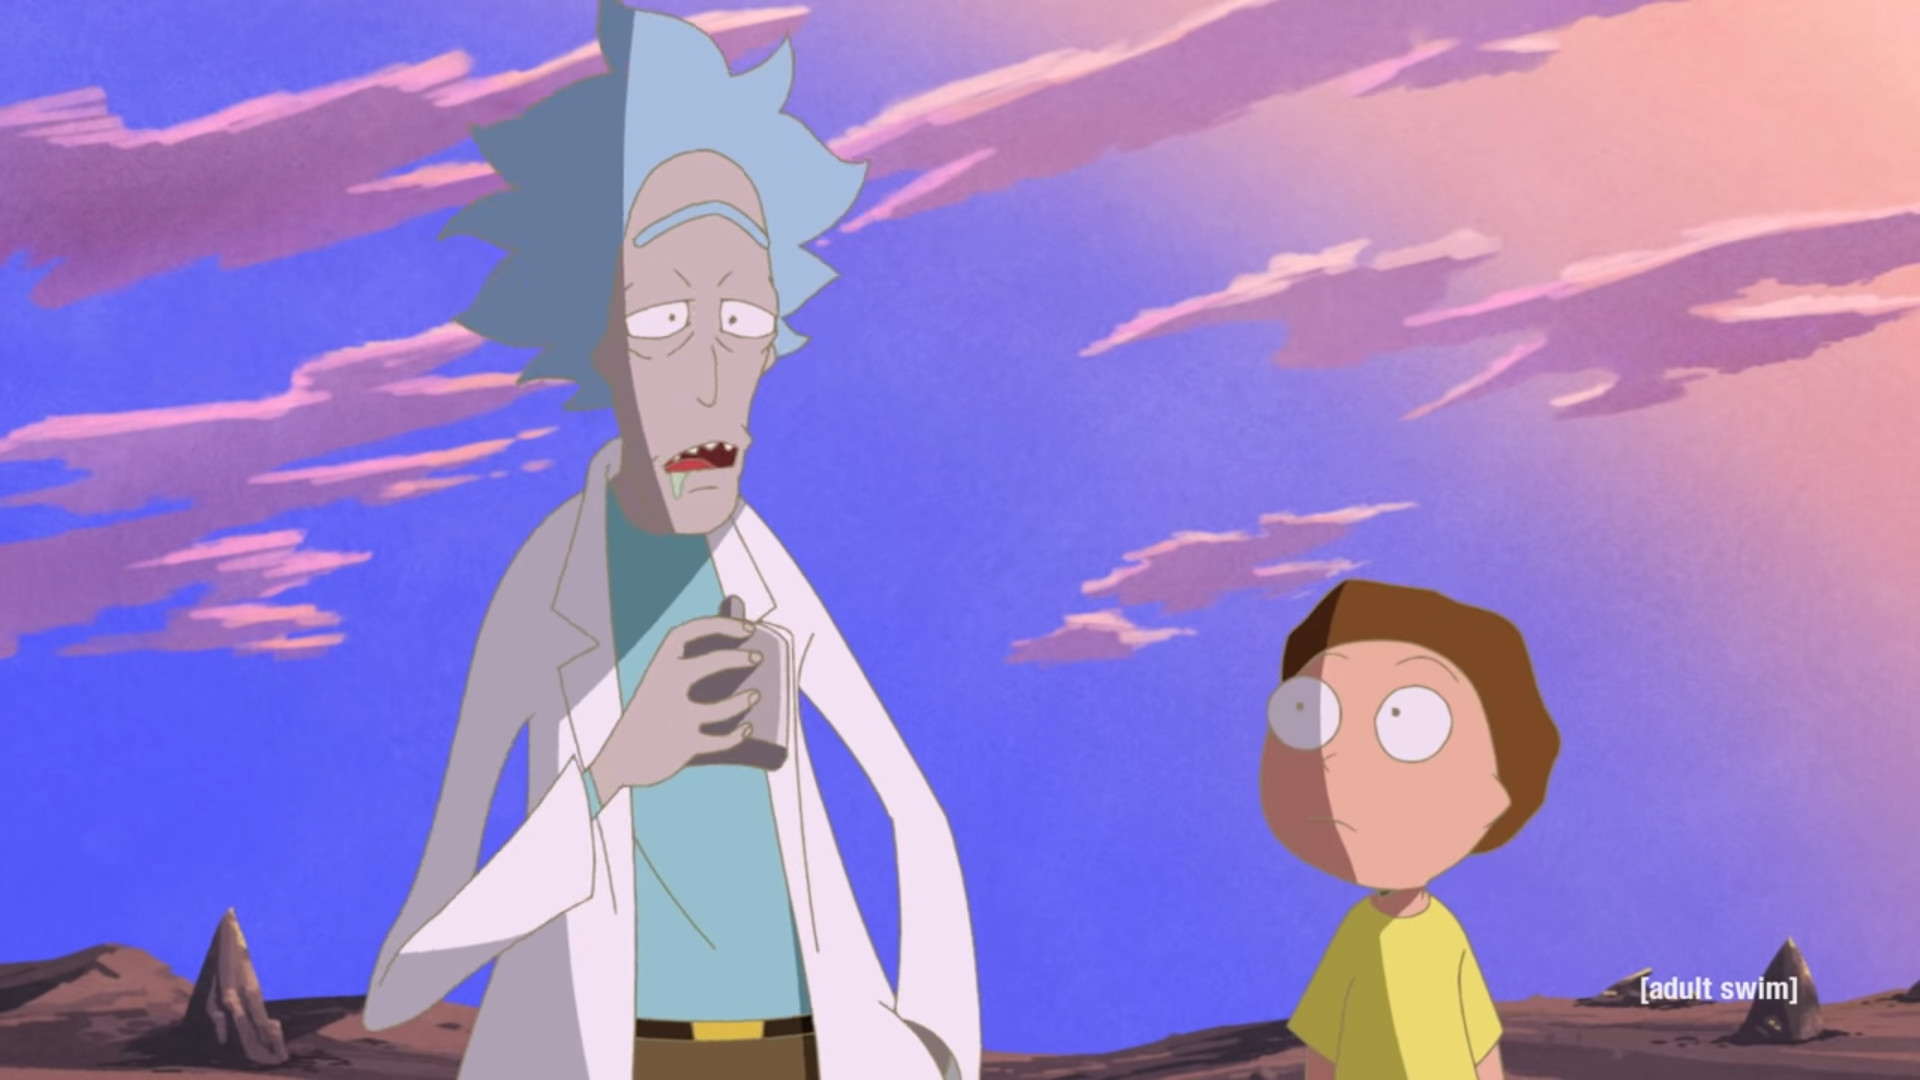 Rick and Morty producer teases 